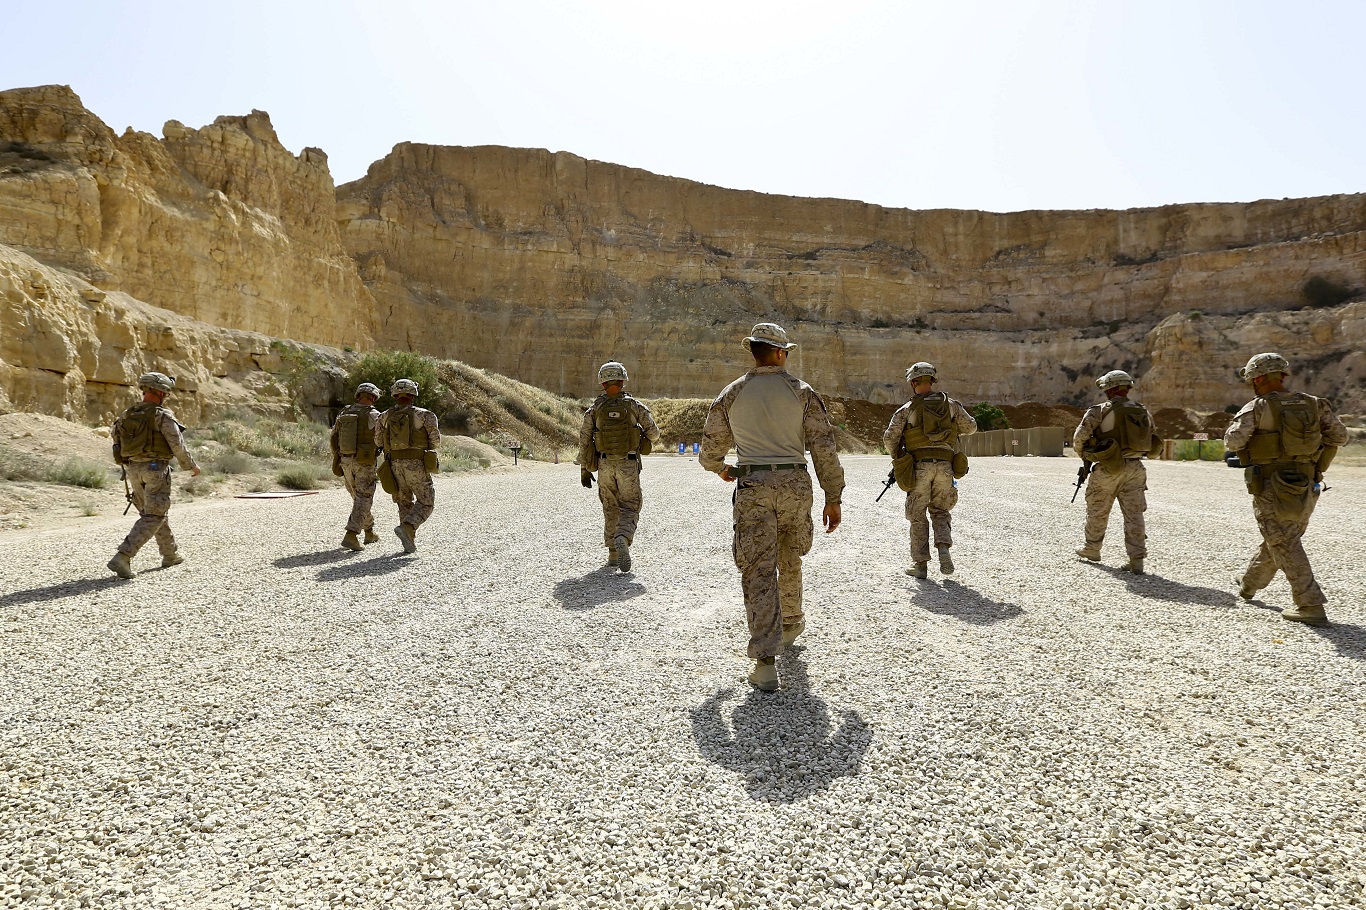 U.S. Marines with 2nd Battalion, 7th Marine Regiment , Special Purpose Marine Air Ground Task Force Crisis Response Central Command 16.2, participate in a live fire range during Exercise Eager Lion 16 at King Abdullah II Special Operations Training Center, Kingdom of Jordan on May 17, 2016. US Marine Corps Photo 